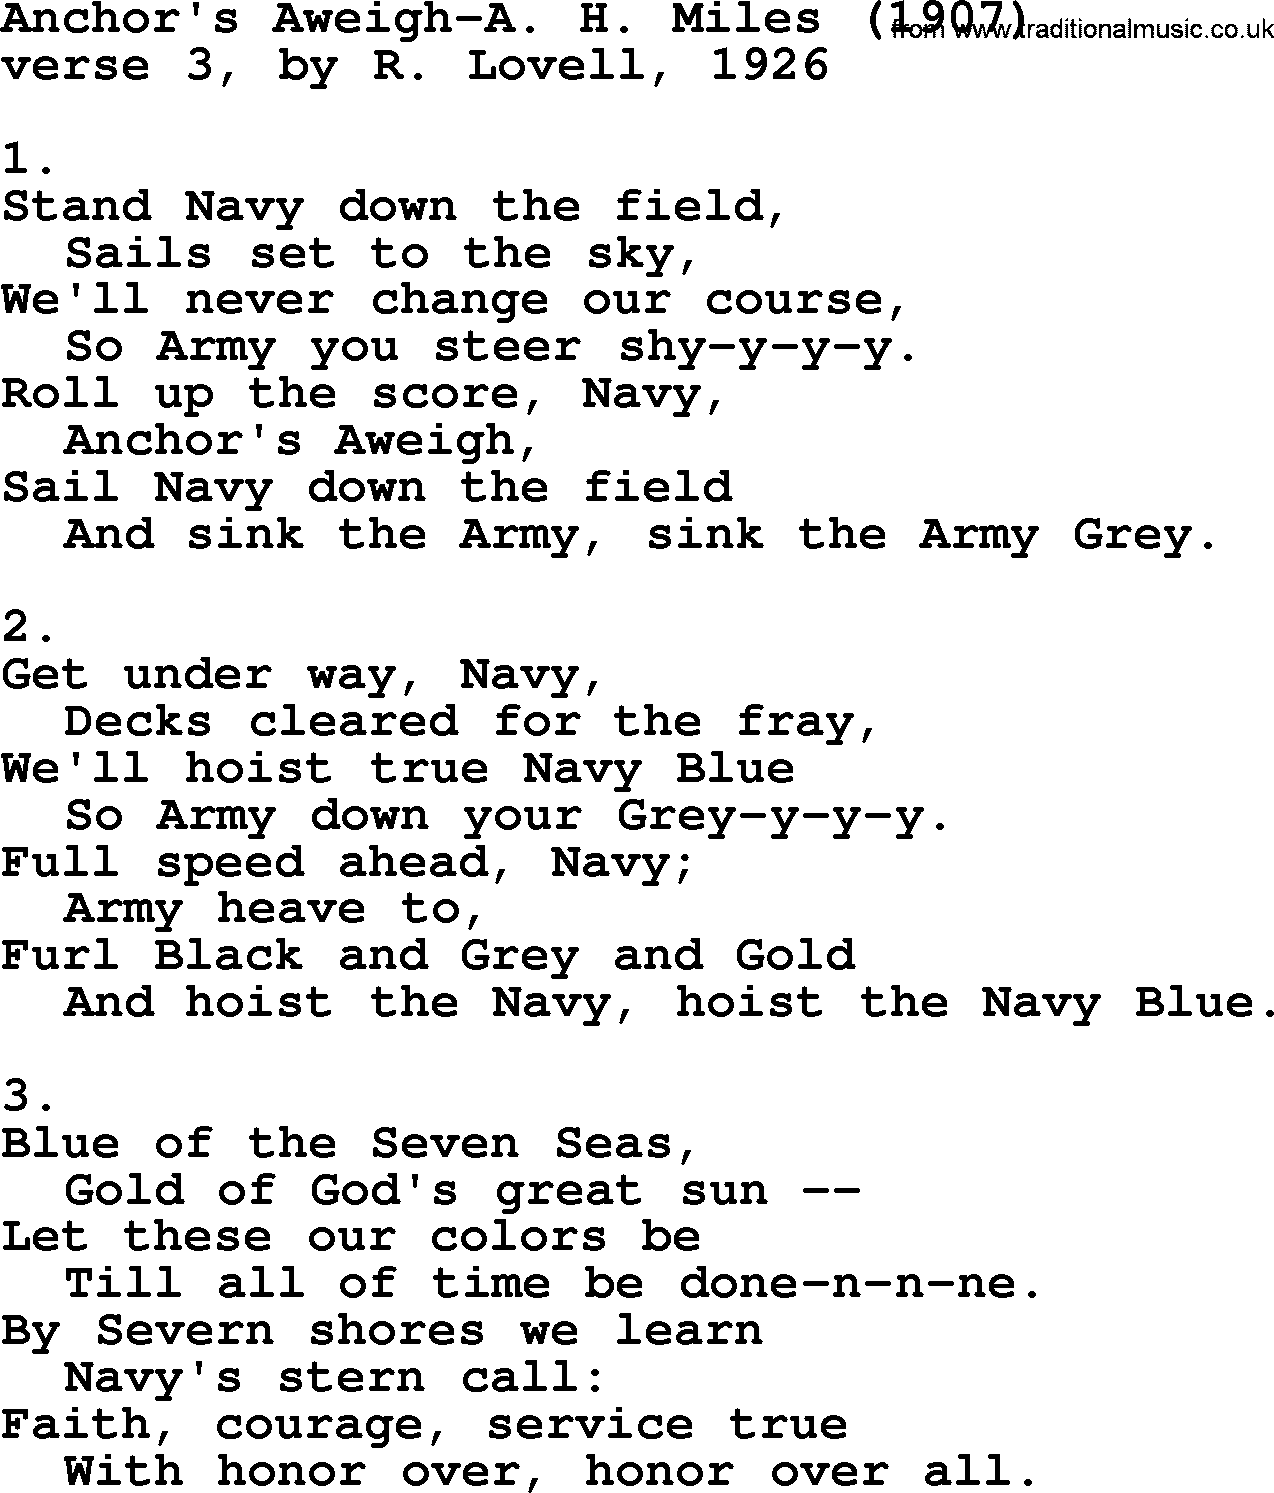 World War(WW1) One Song: Anchor's Aweigh-A H Miles 1907, lyrics and PDF